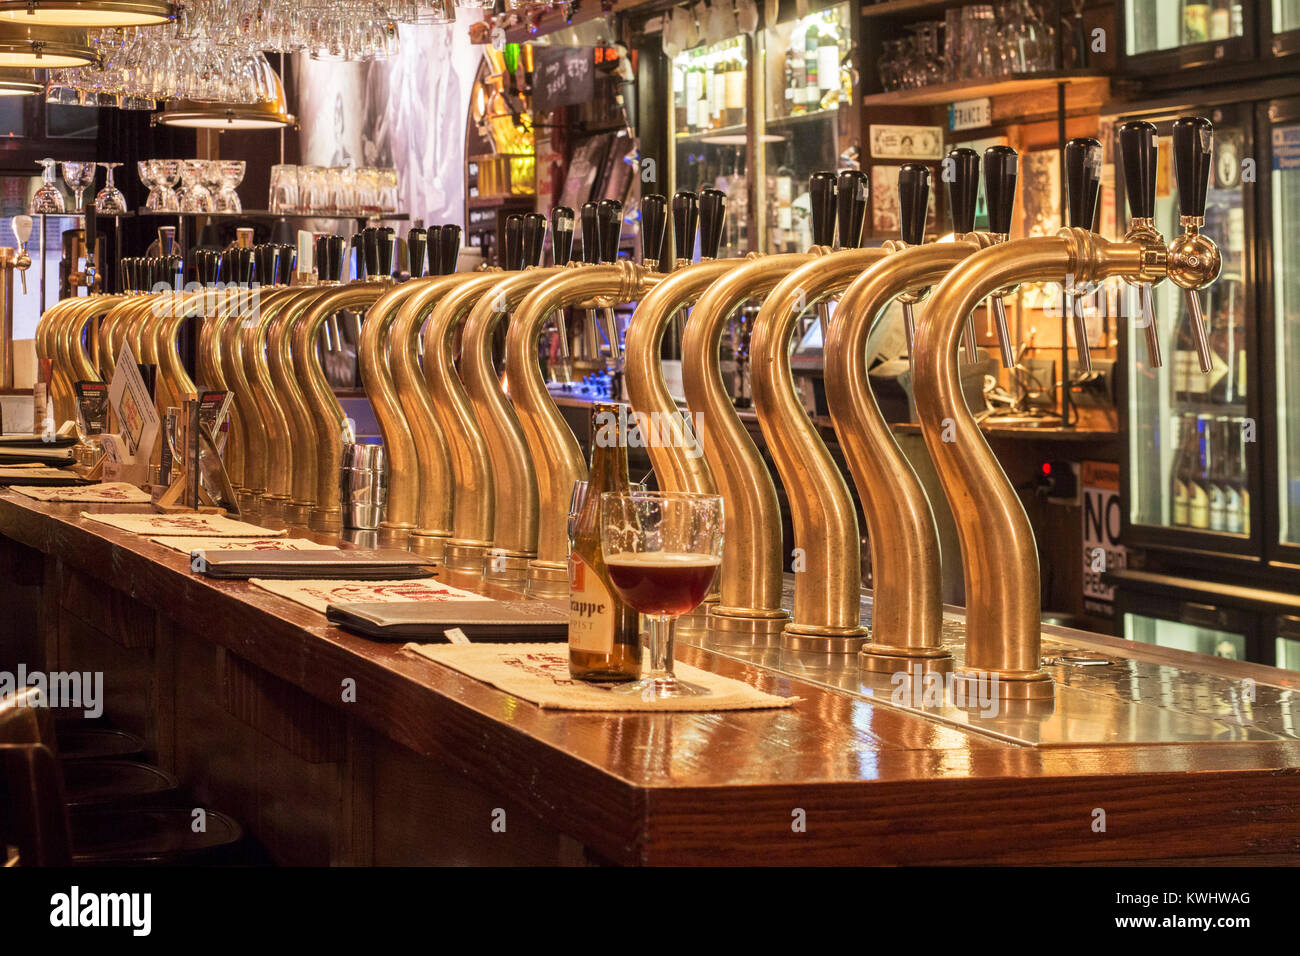 draught beer bar with lots of